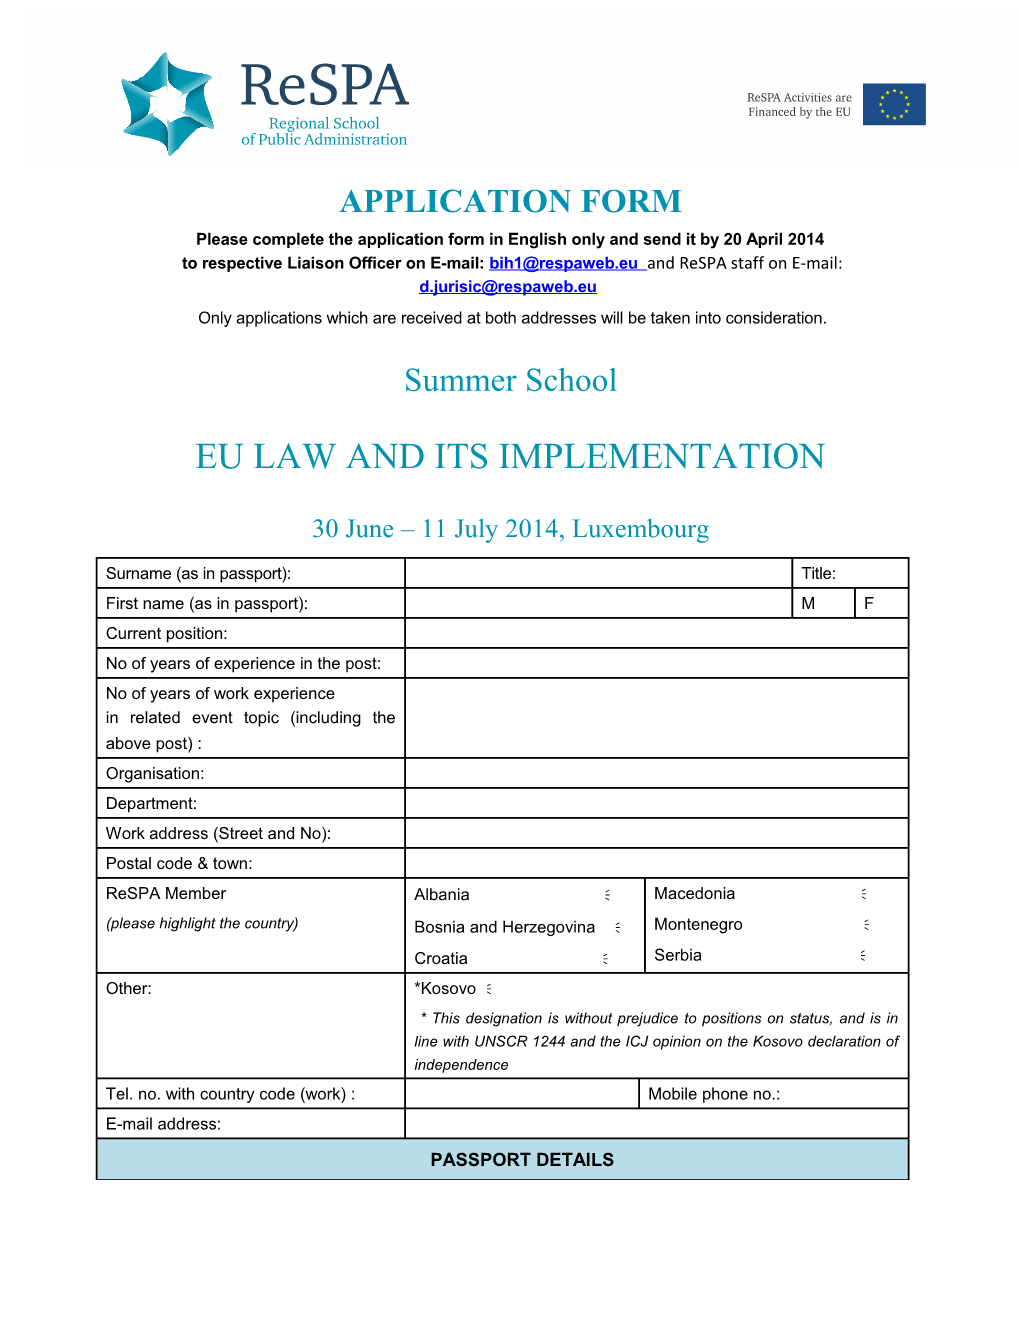 Please Complete the Application Form in English Only and Send It by 20 April 2014